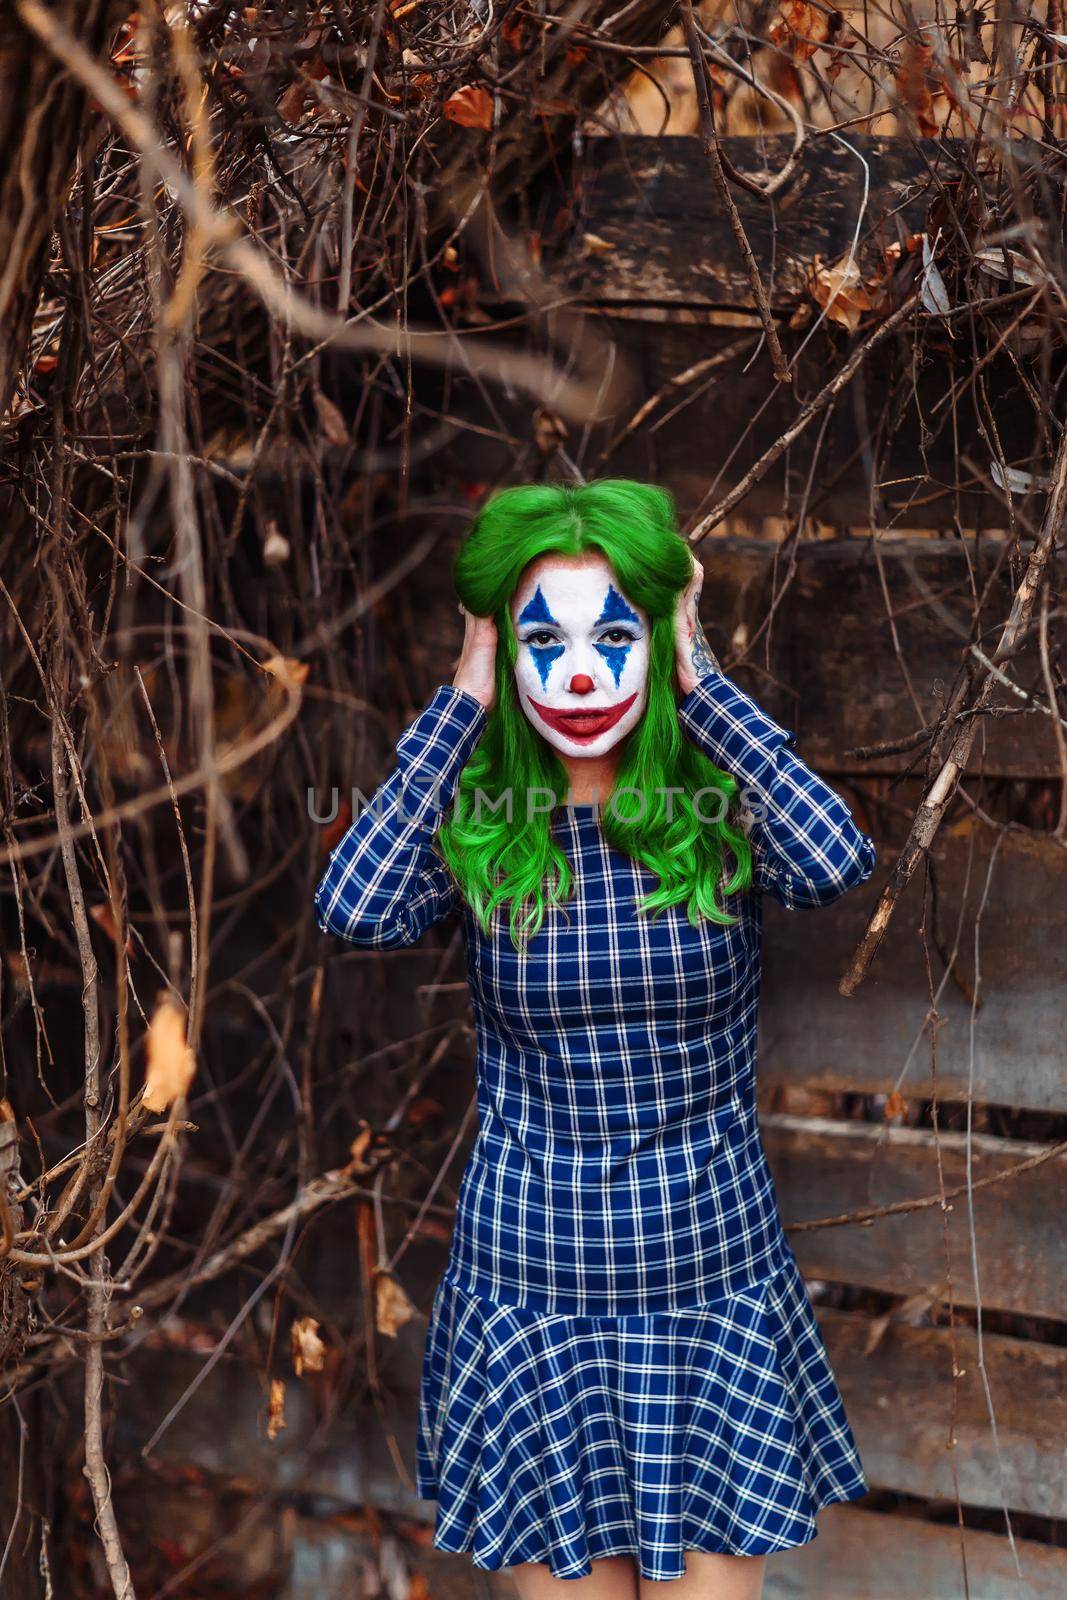 Portrait of a greenhaired woman in chekered dress with joker makeup on a atmospheric wooden background.